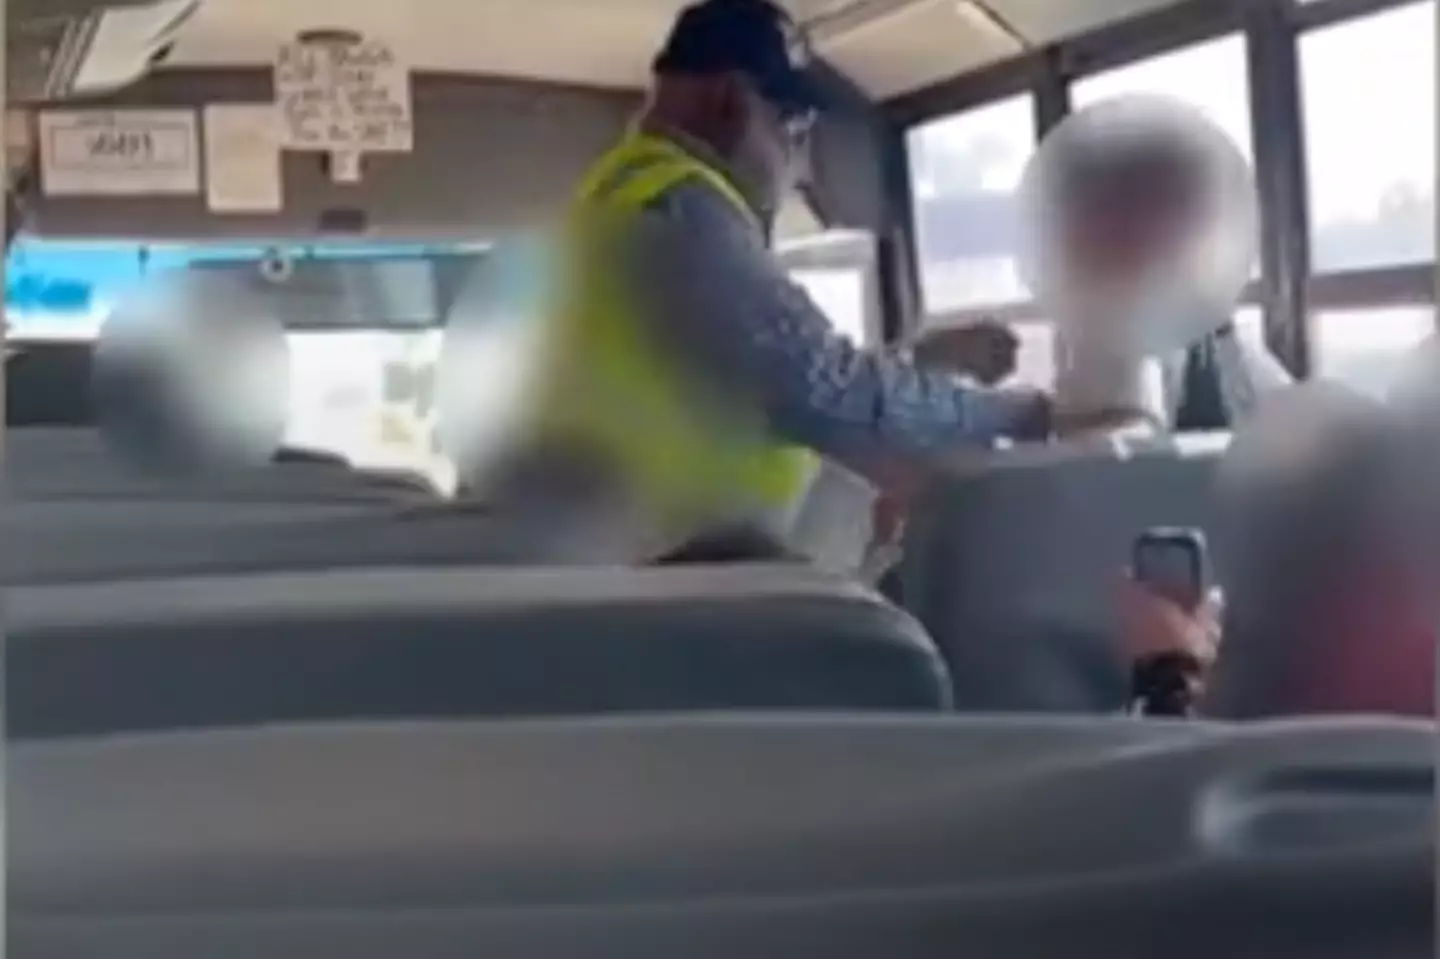 A bus driver was filmed in an altercation with a student.